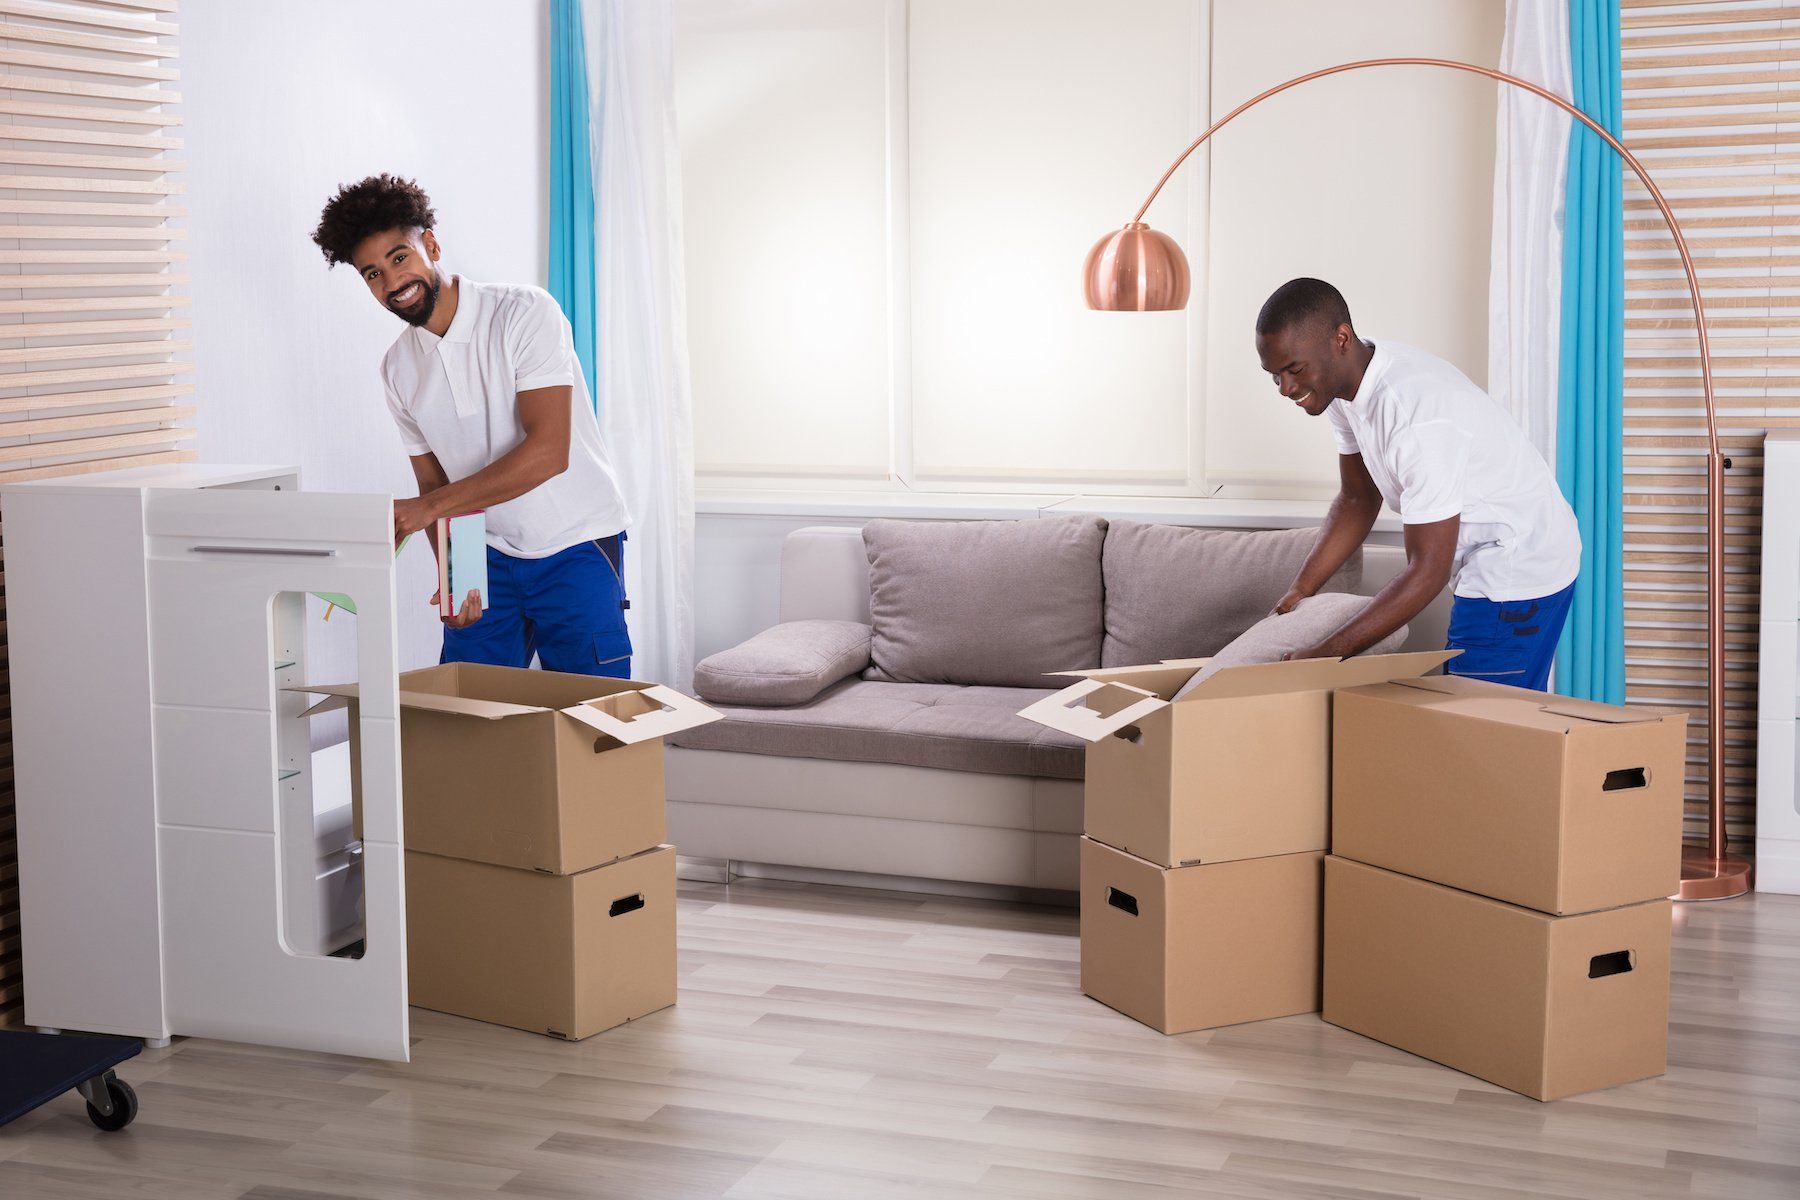 Professionals unpacking cardboard boxes and organizing belongings in a home during a move.